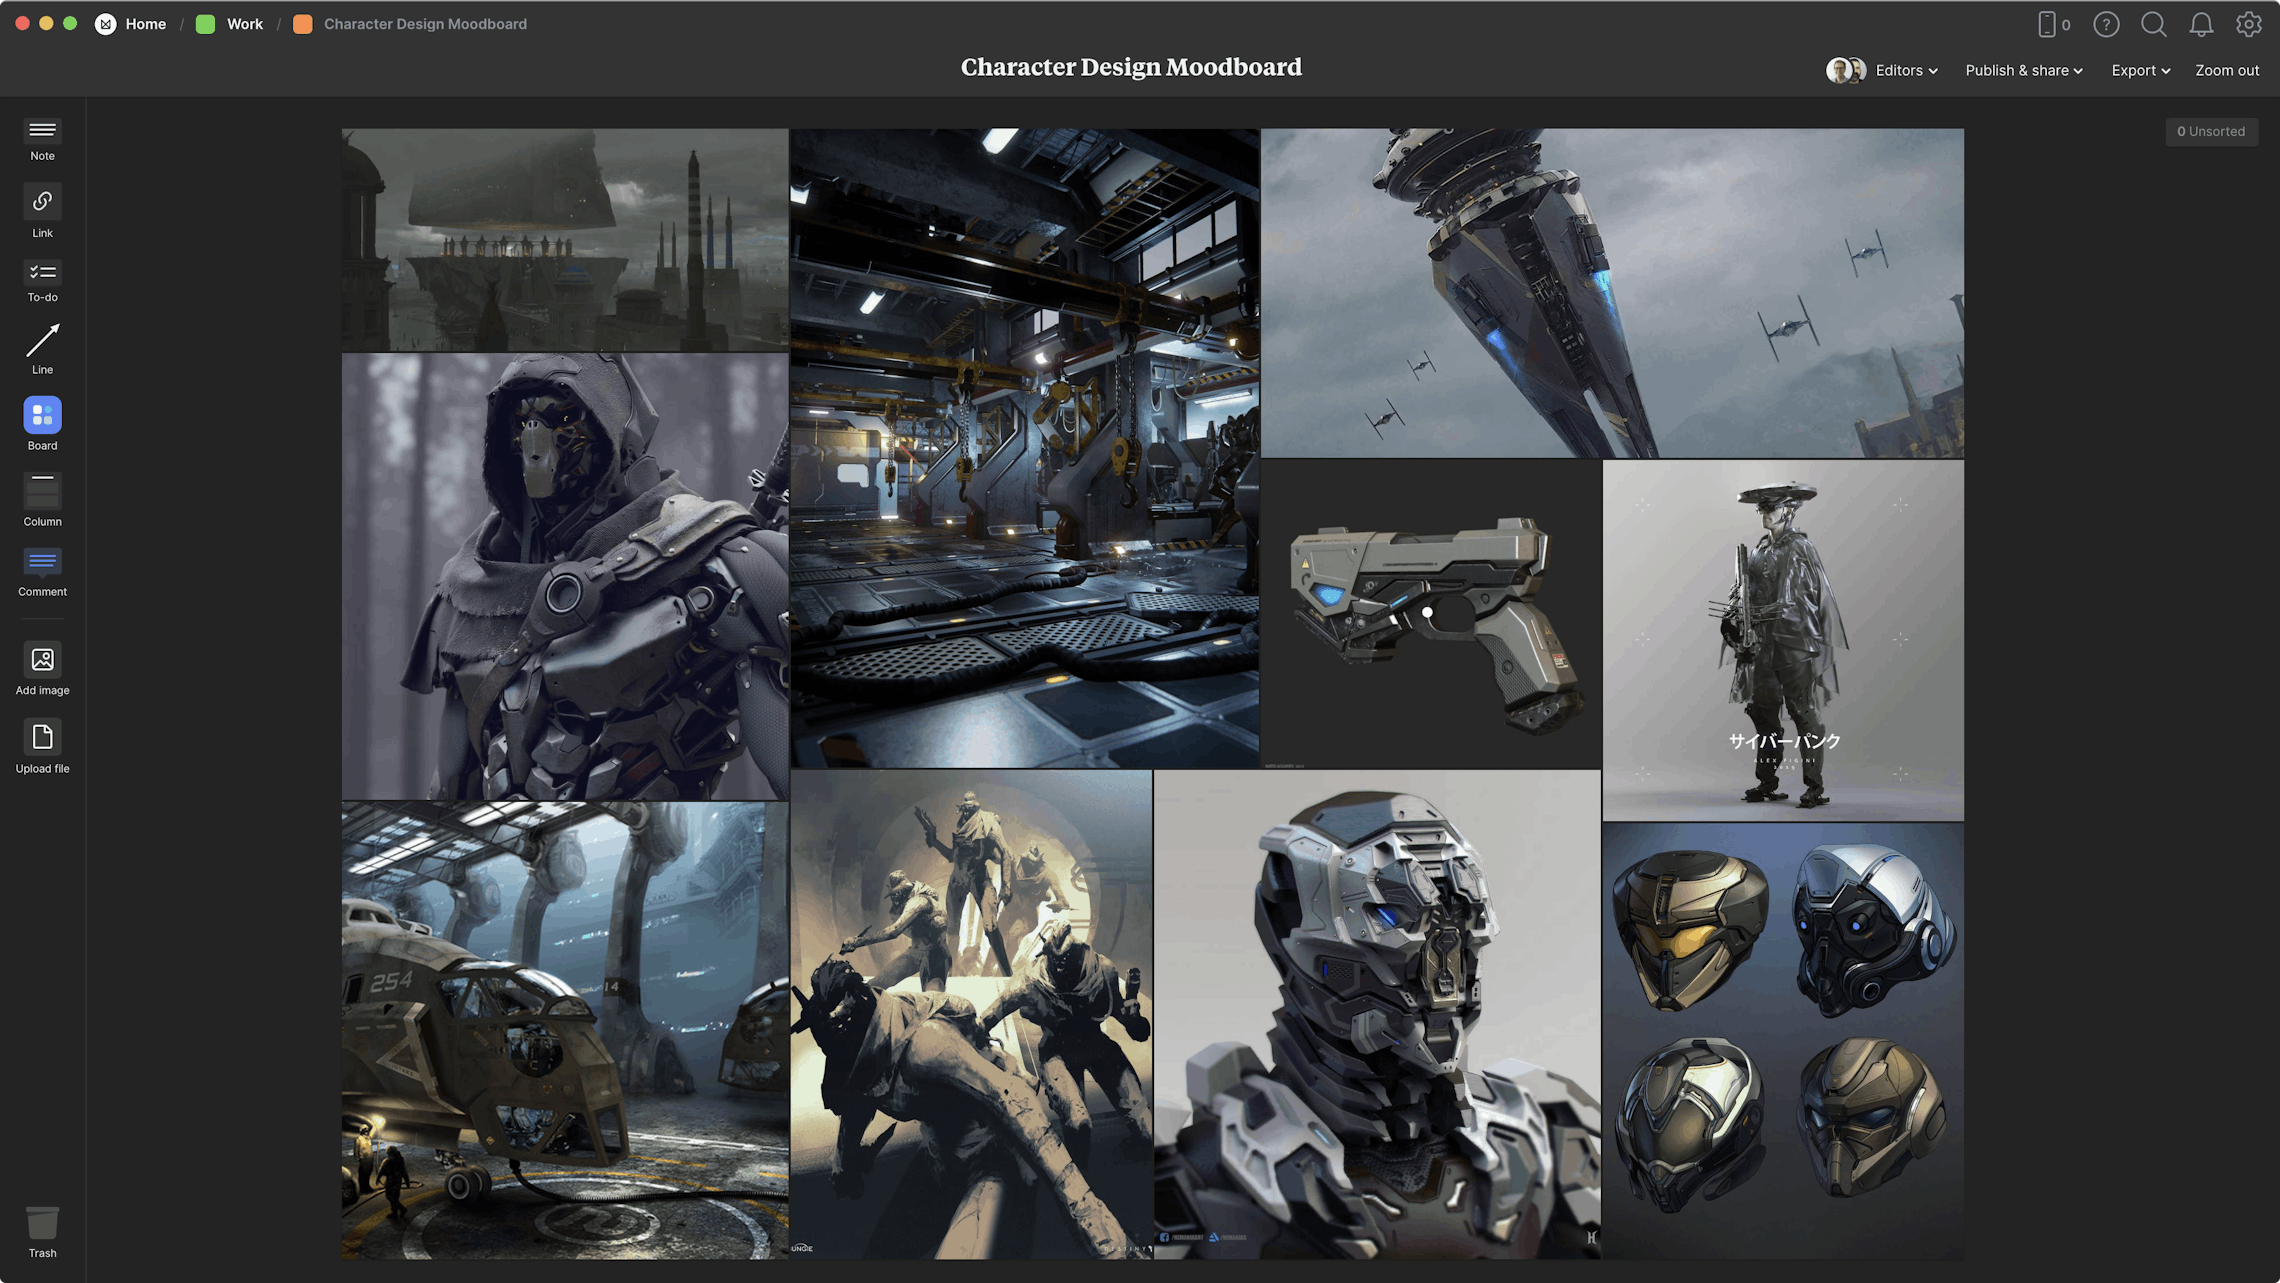 Character Design Moodboard Template & Example - Milanote